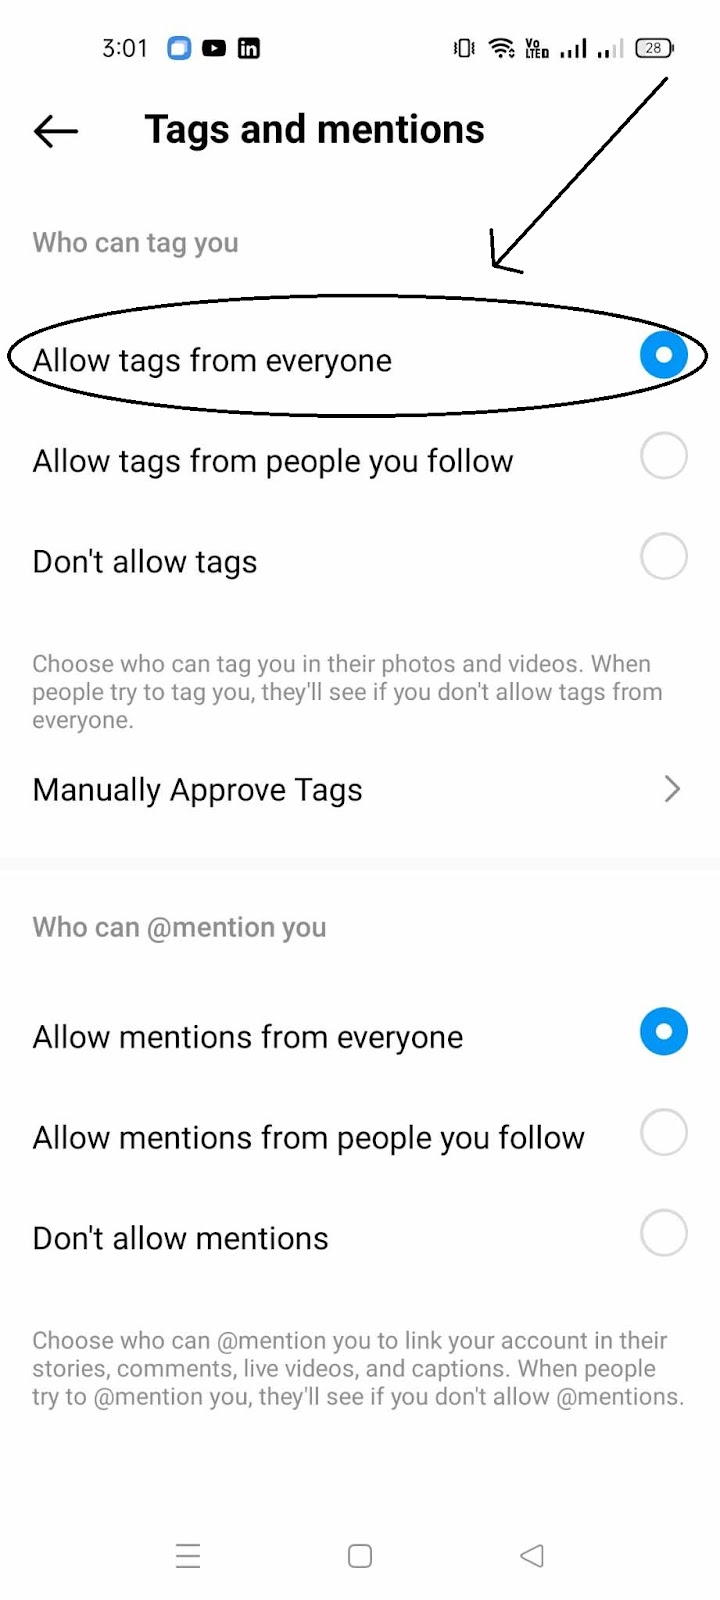 Invite Collaborator - Allow Tags from Everyone